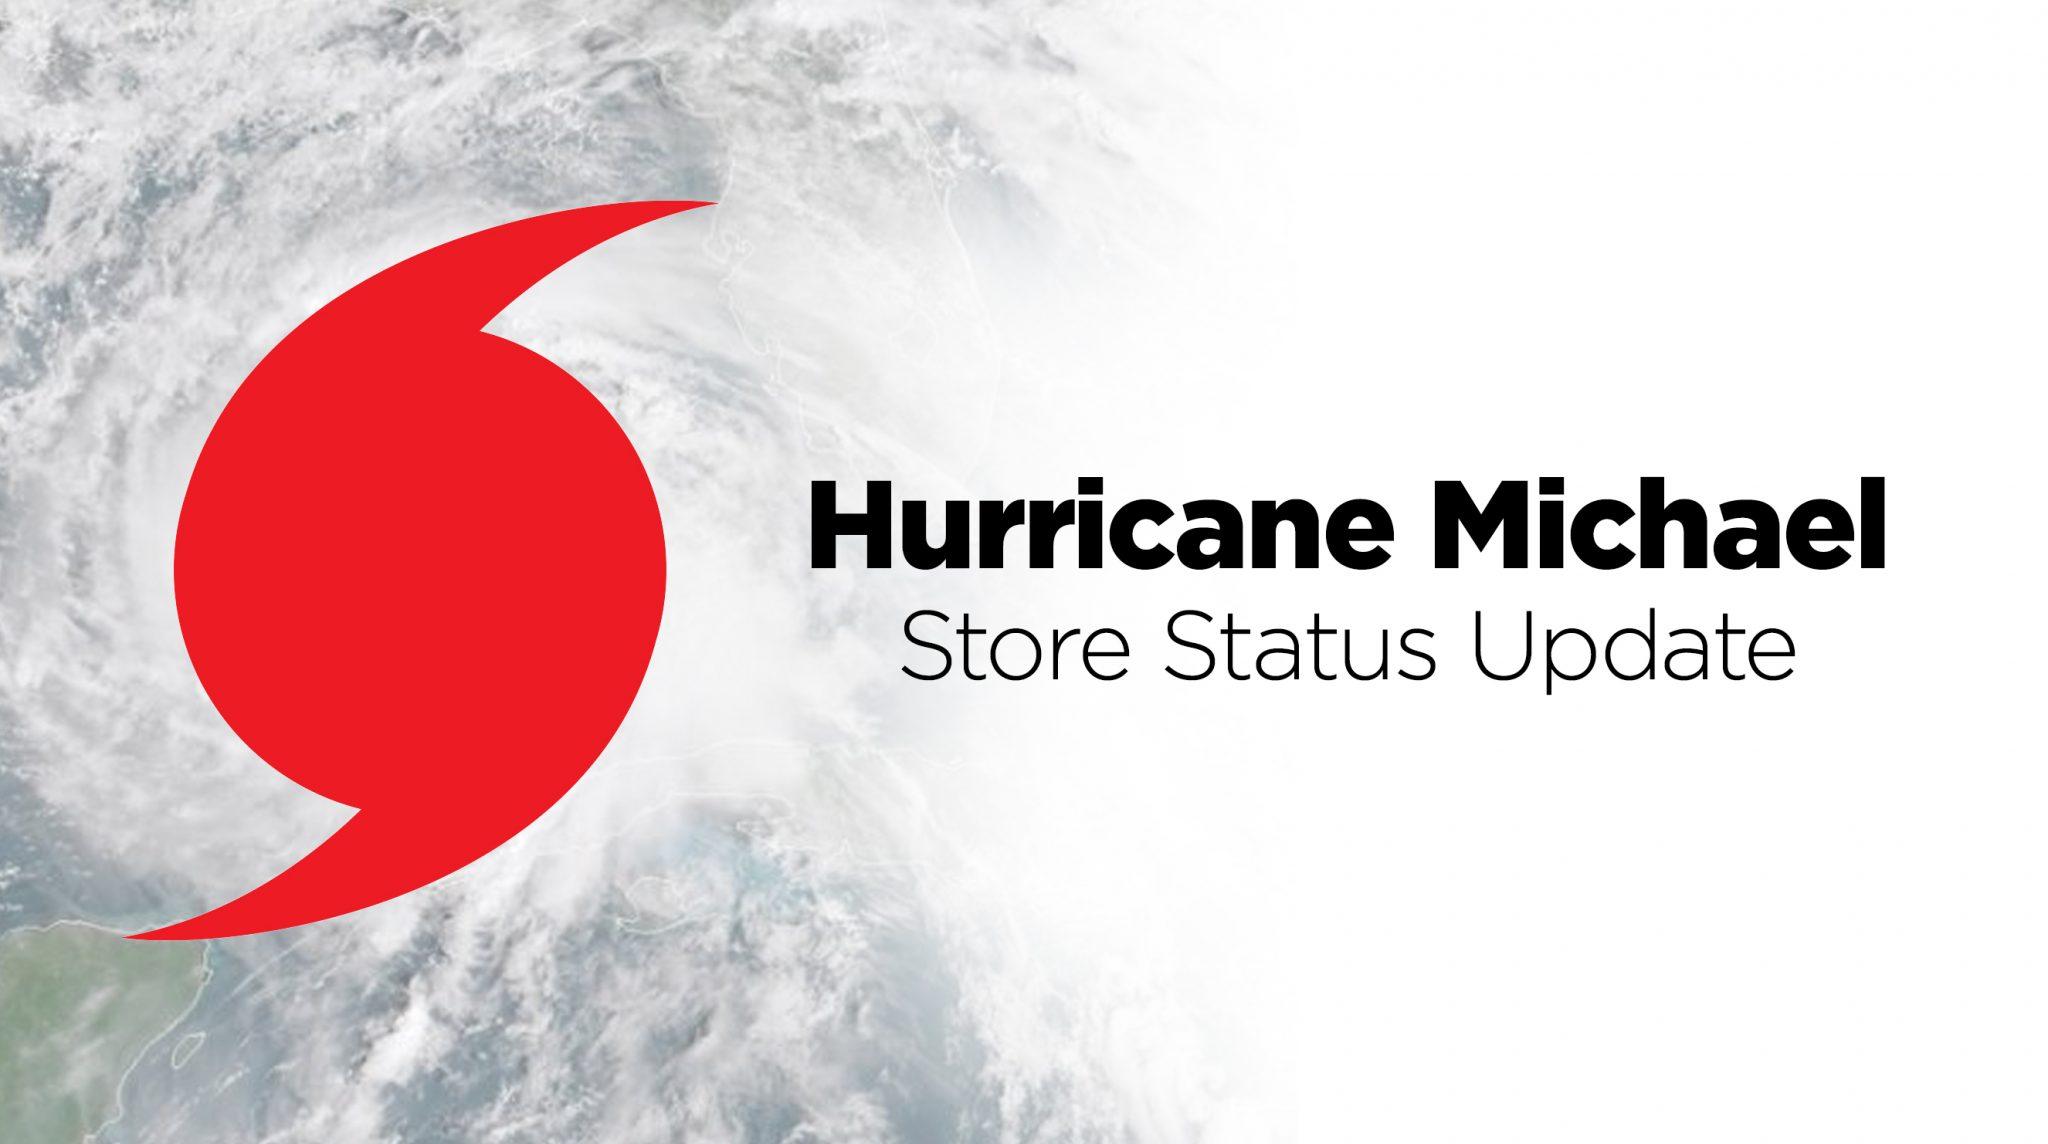 JCPenney 2018 Logo - JCPenney Provides Update on Hurricane Michael – JCPenney Company Blog